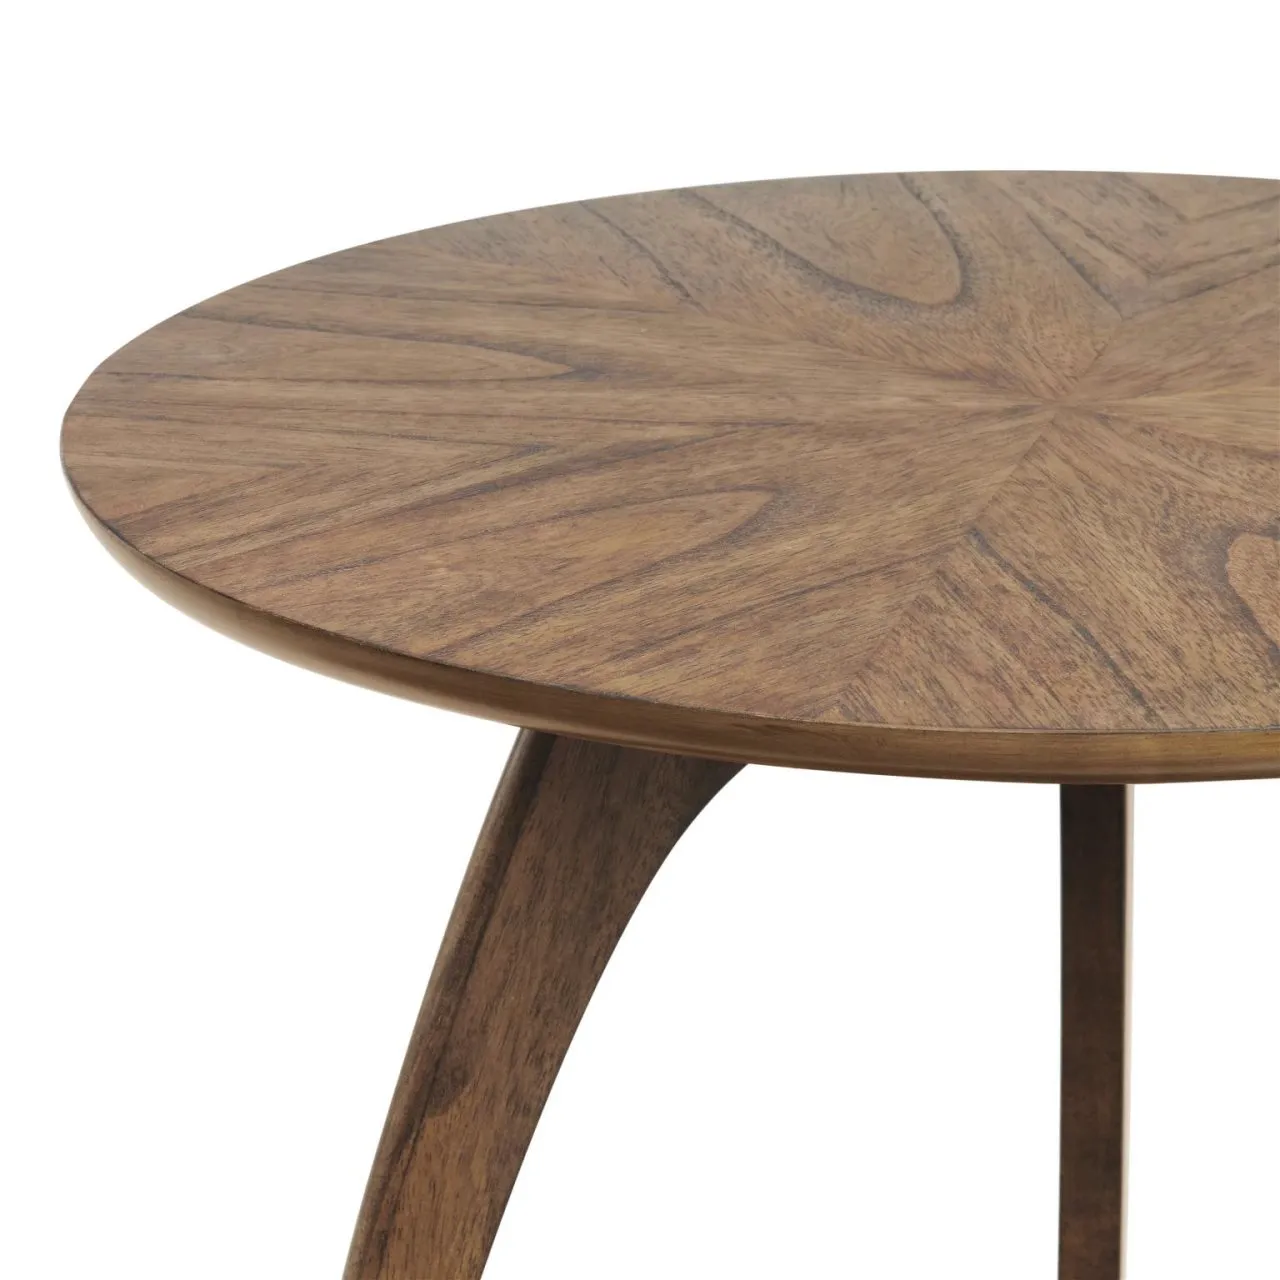 LAX 20 INCH ROUND END TABLE WITH STORAGE IN WARM NUTMEG